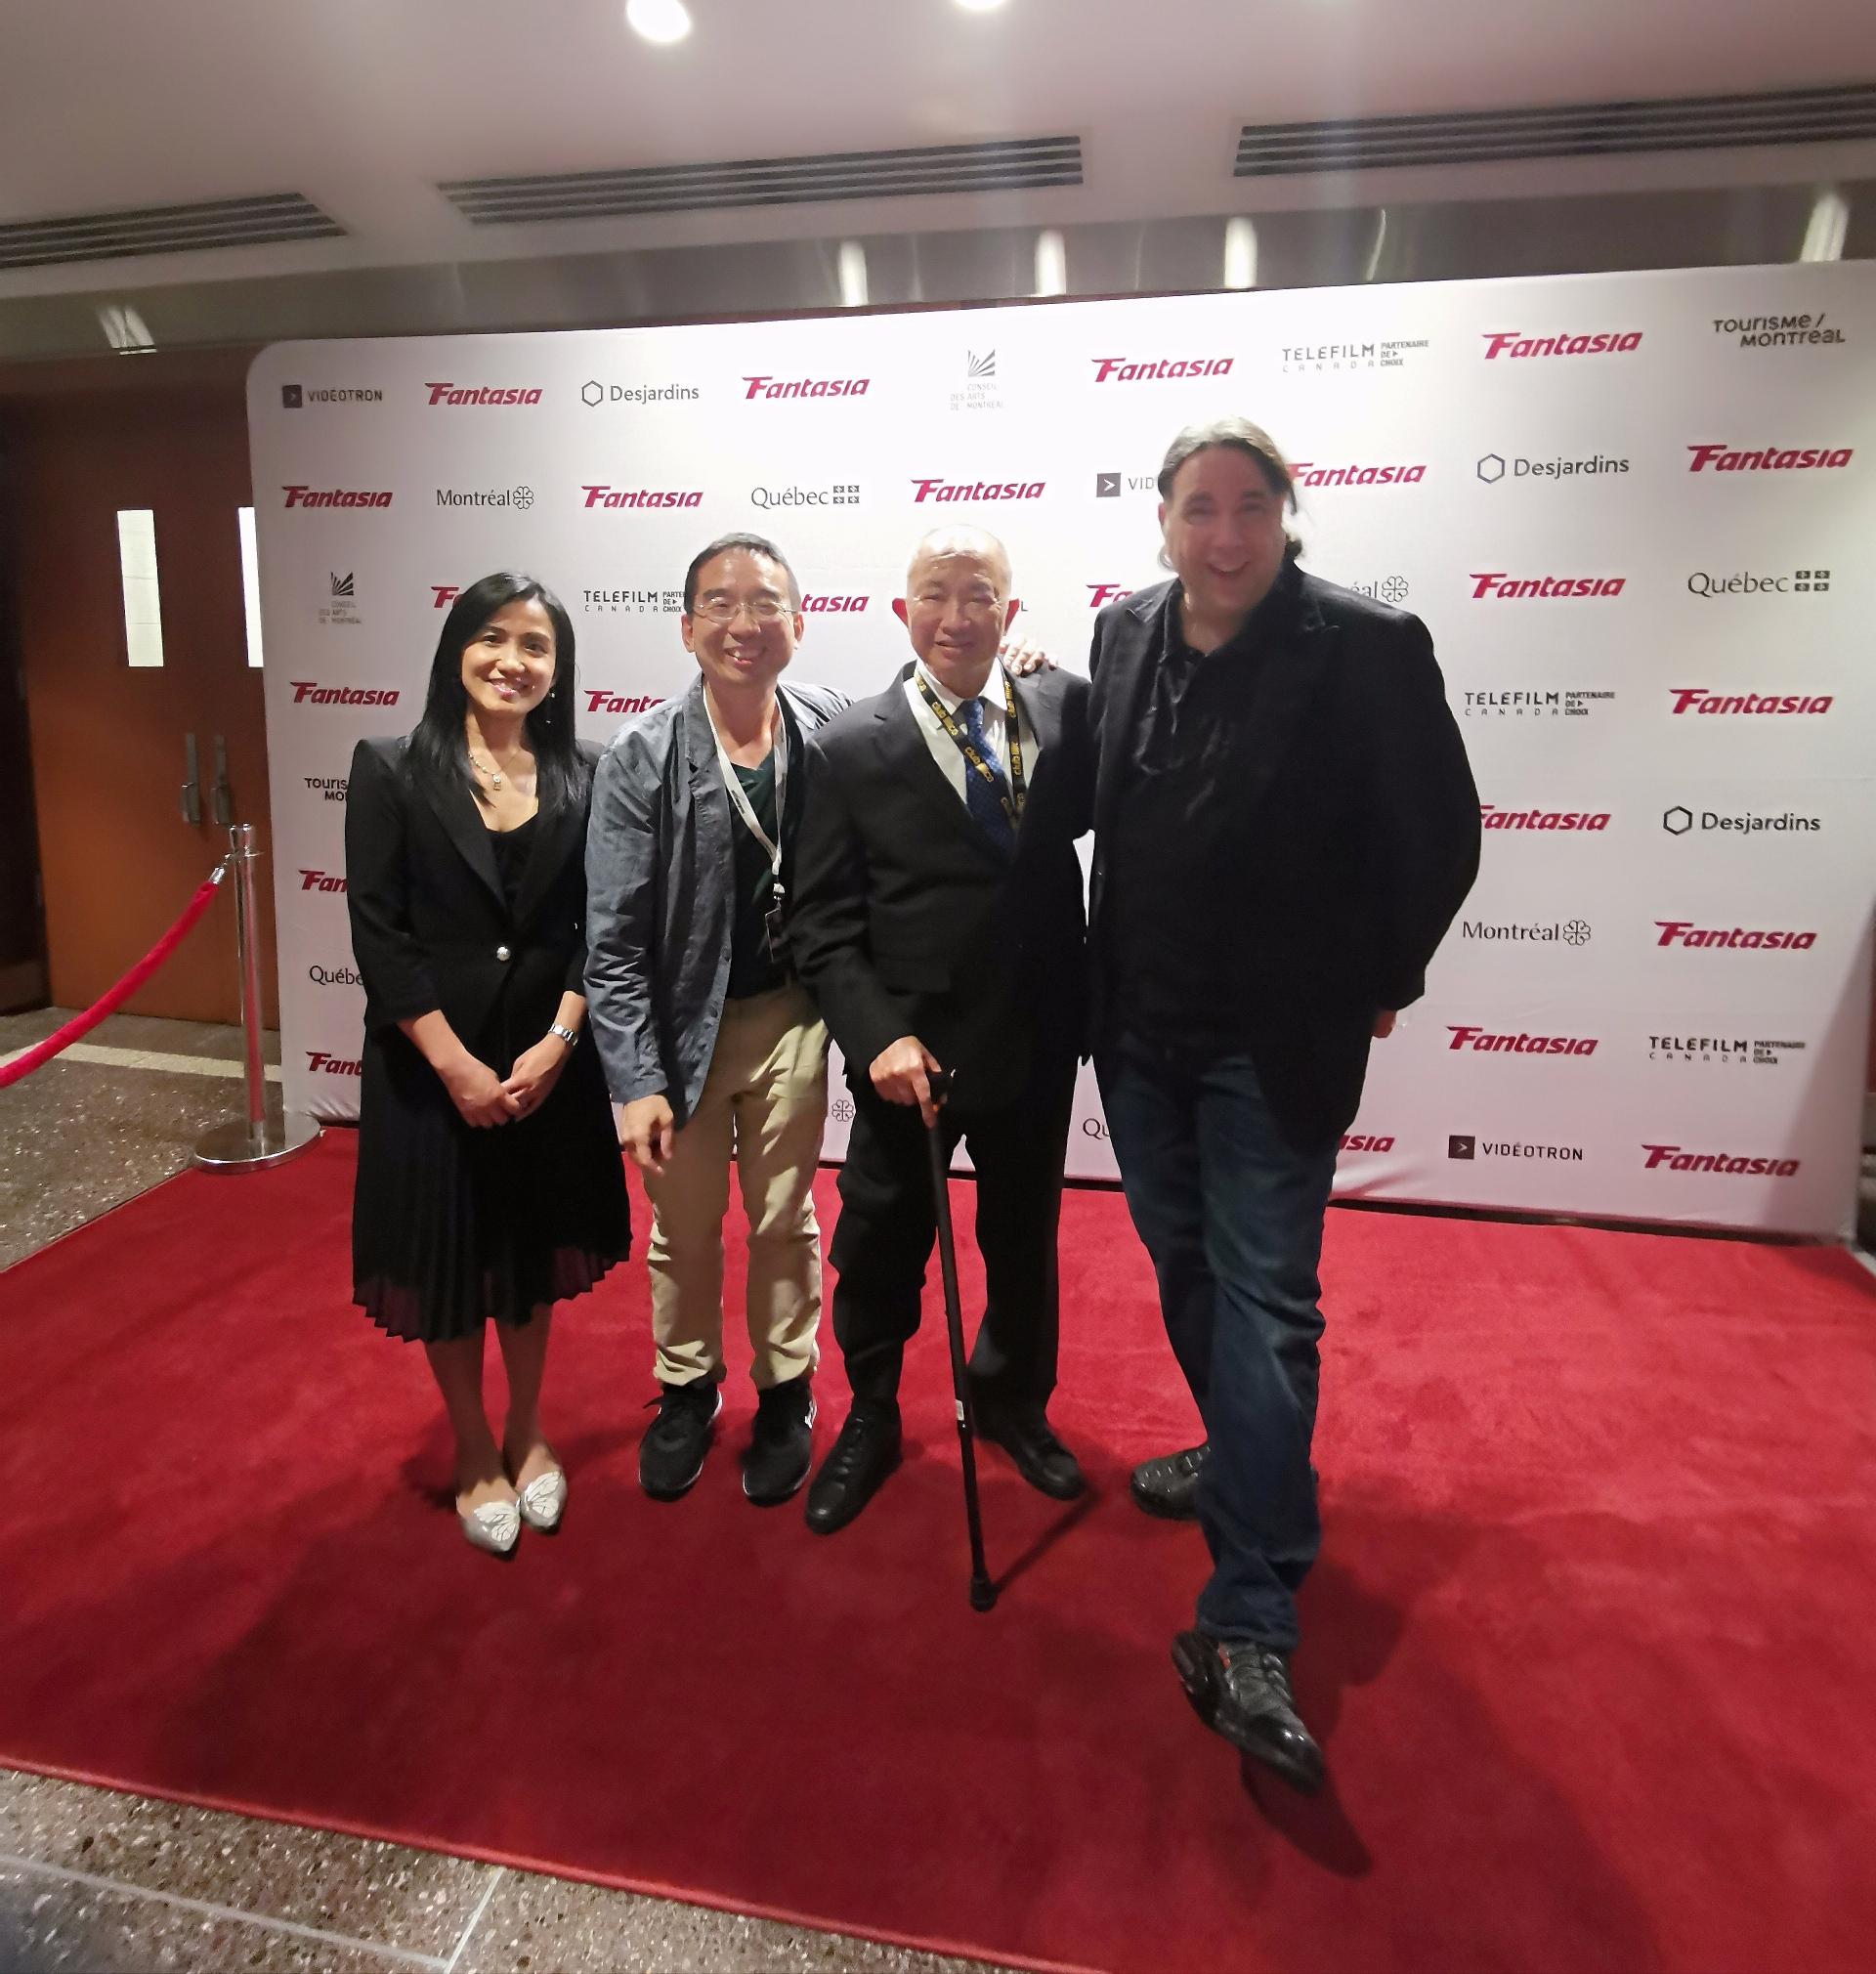 The Hong Kong Economic and Trade Office (Toronto) (Toronto ETO) supported the screening of seven Hong Kong films at the 26th Fantasia International Film Festival held from July 14 to August 3 in Montreal, Canada. Photo shows (from left) the Director of the Toronto ETO, Ms Emily Mo, the Co-director of Asian Programming, Fantasia International Film Festival, Mr King-wei Chu, Hong Kong Director, Mr John Woo, and the Artistic Director of Fantasia International Film Festival, Mr Mitch Davis at Concordia Hall Theatre on July 15 (Montreal time).